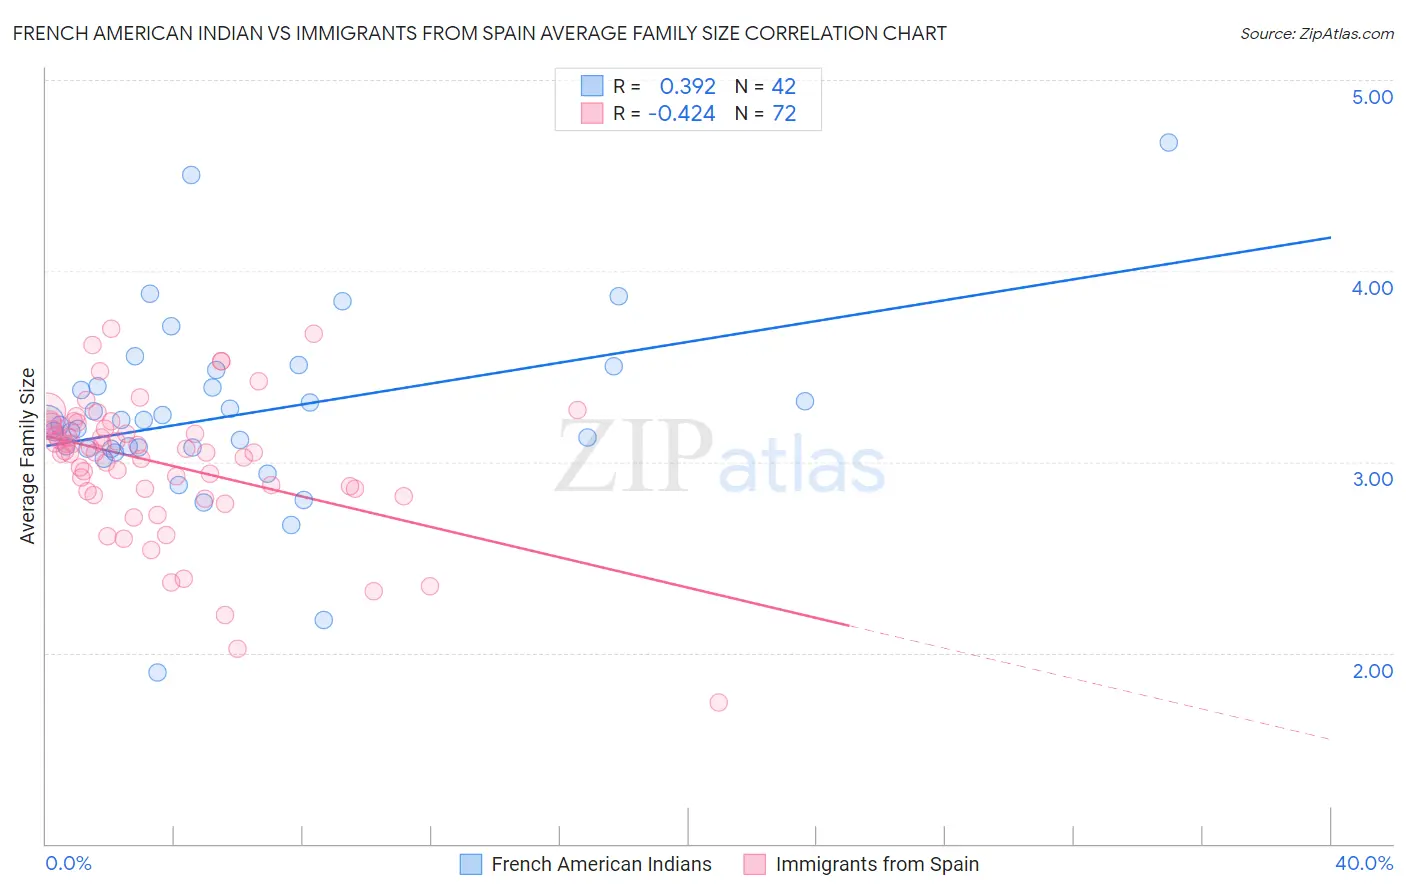 French American Indian vs Immigrants from Spain Average Family Size